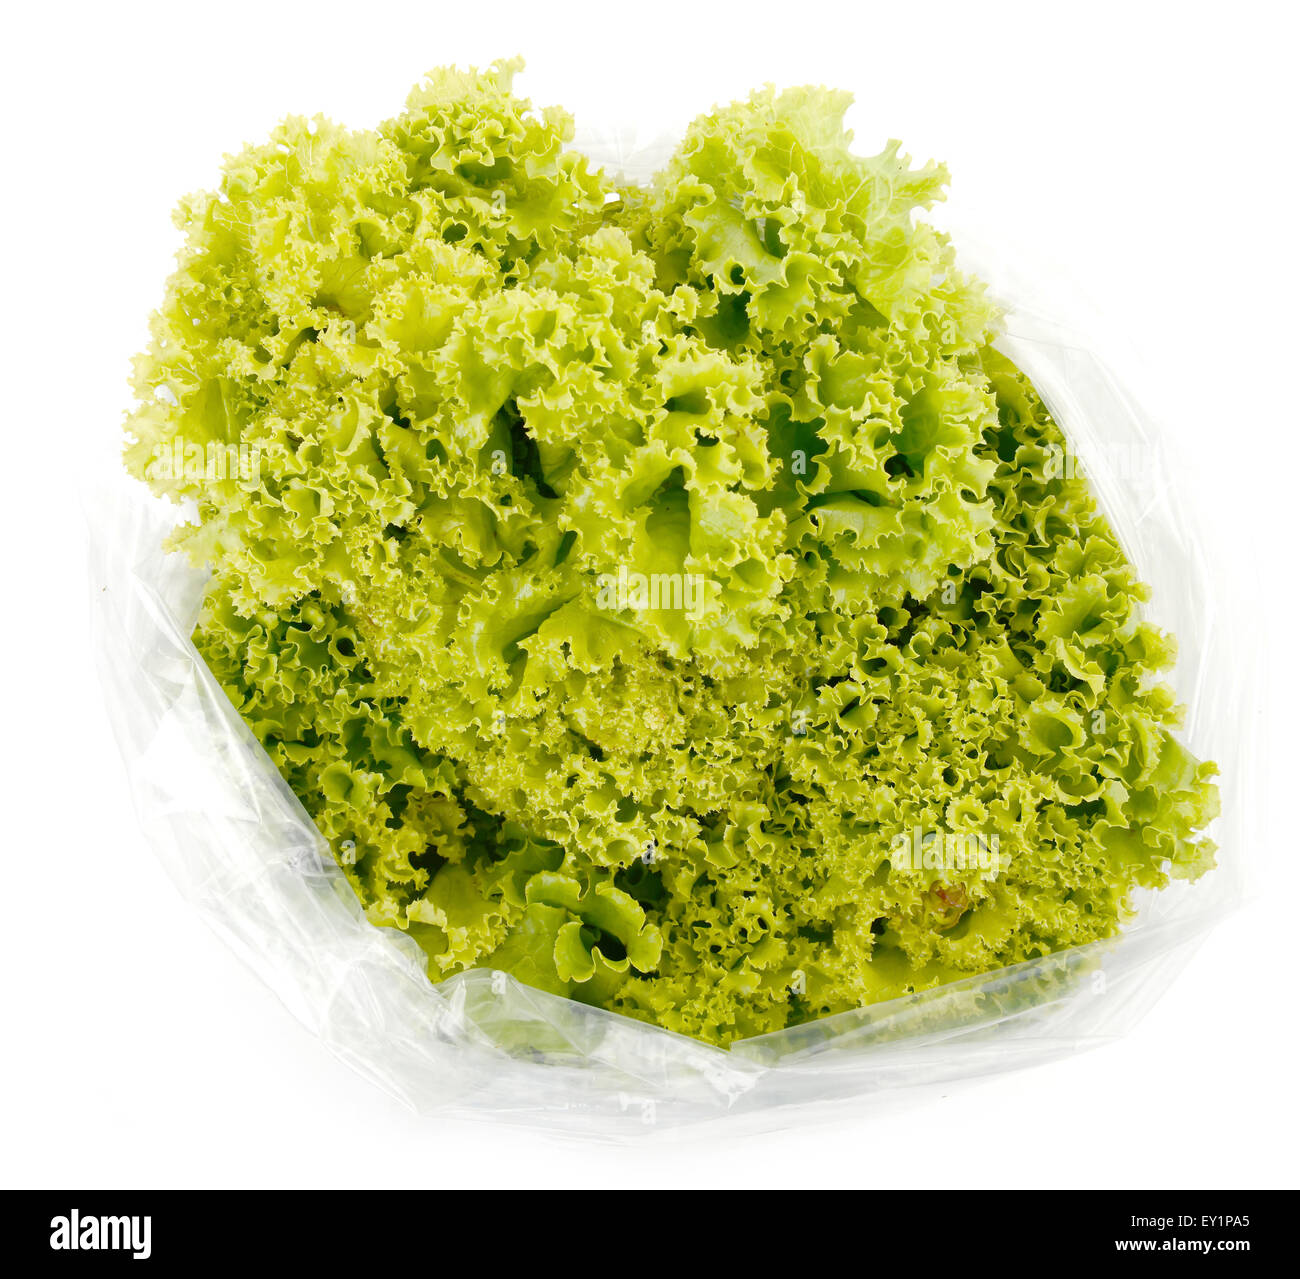 iceberg lettuce in plastic bag package with price tag Stock Photo